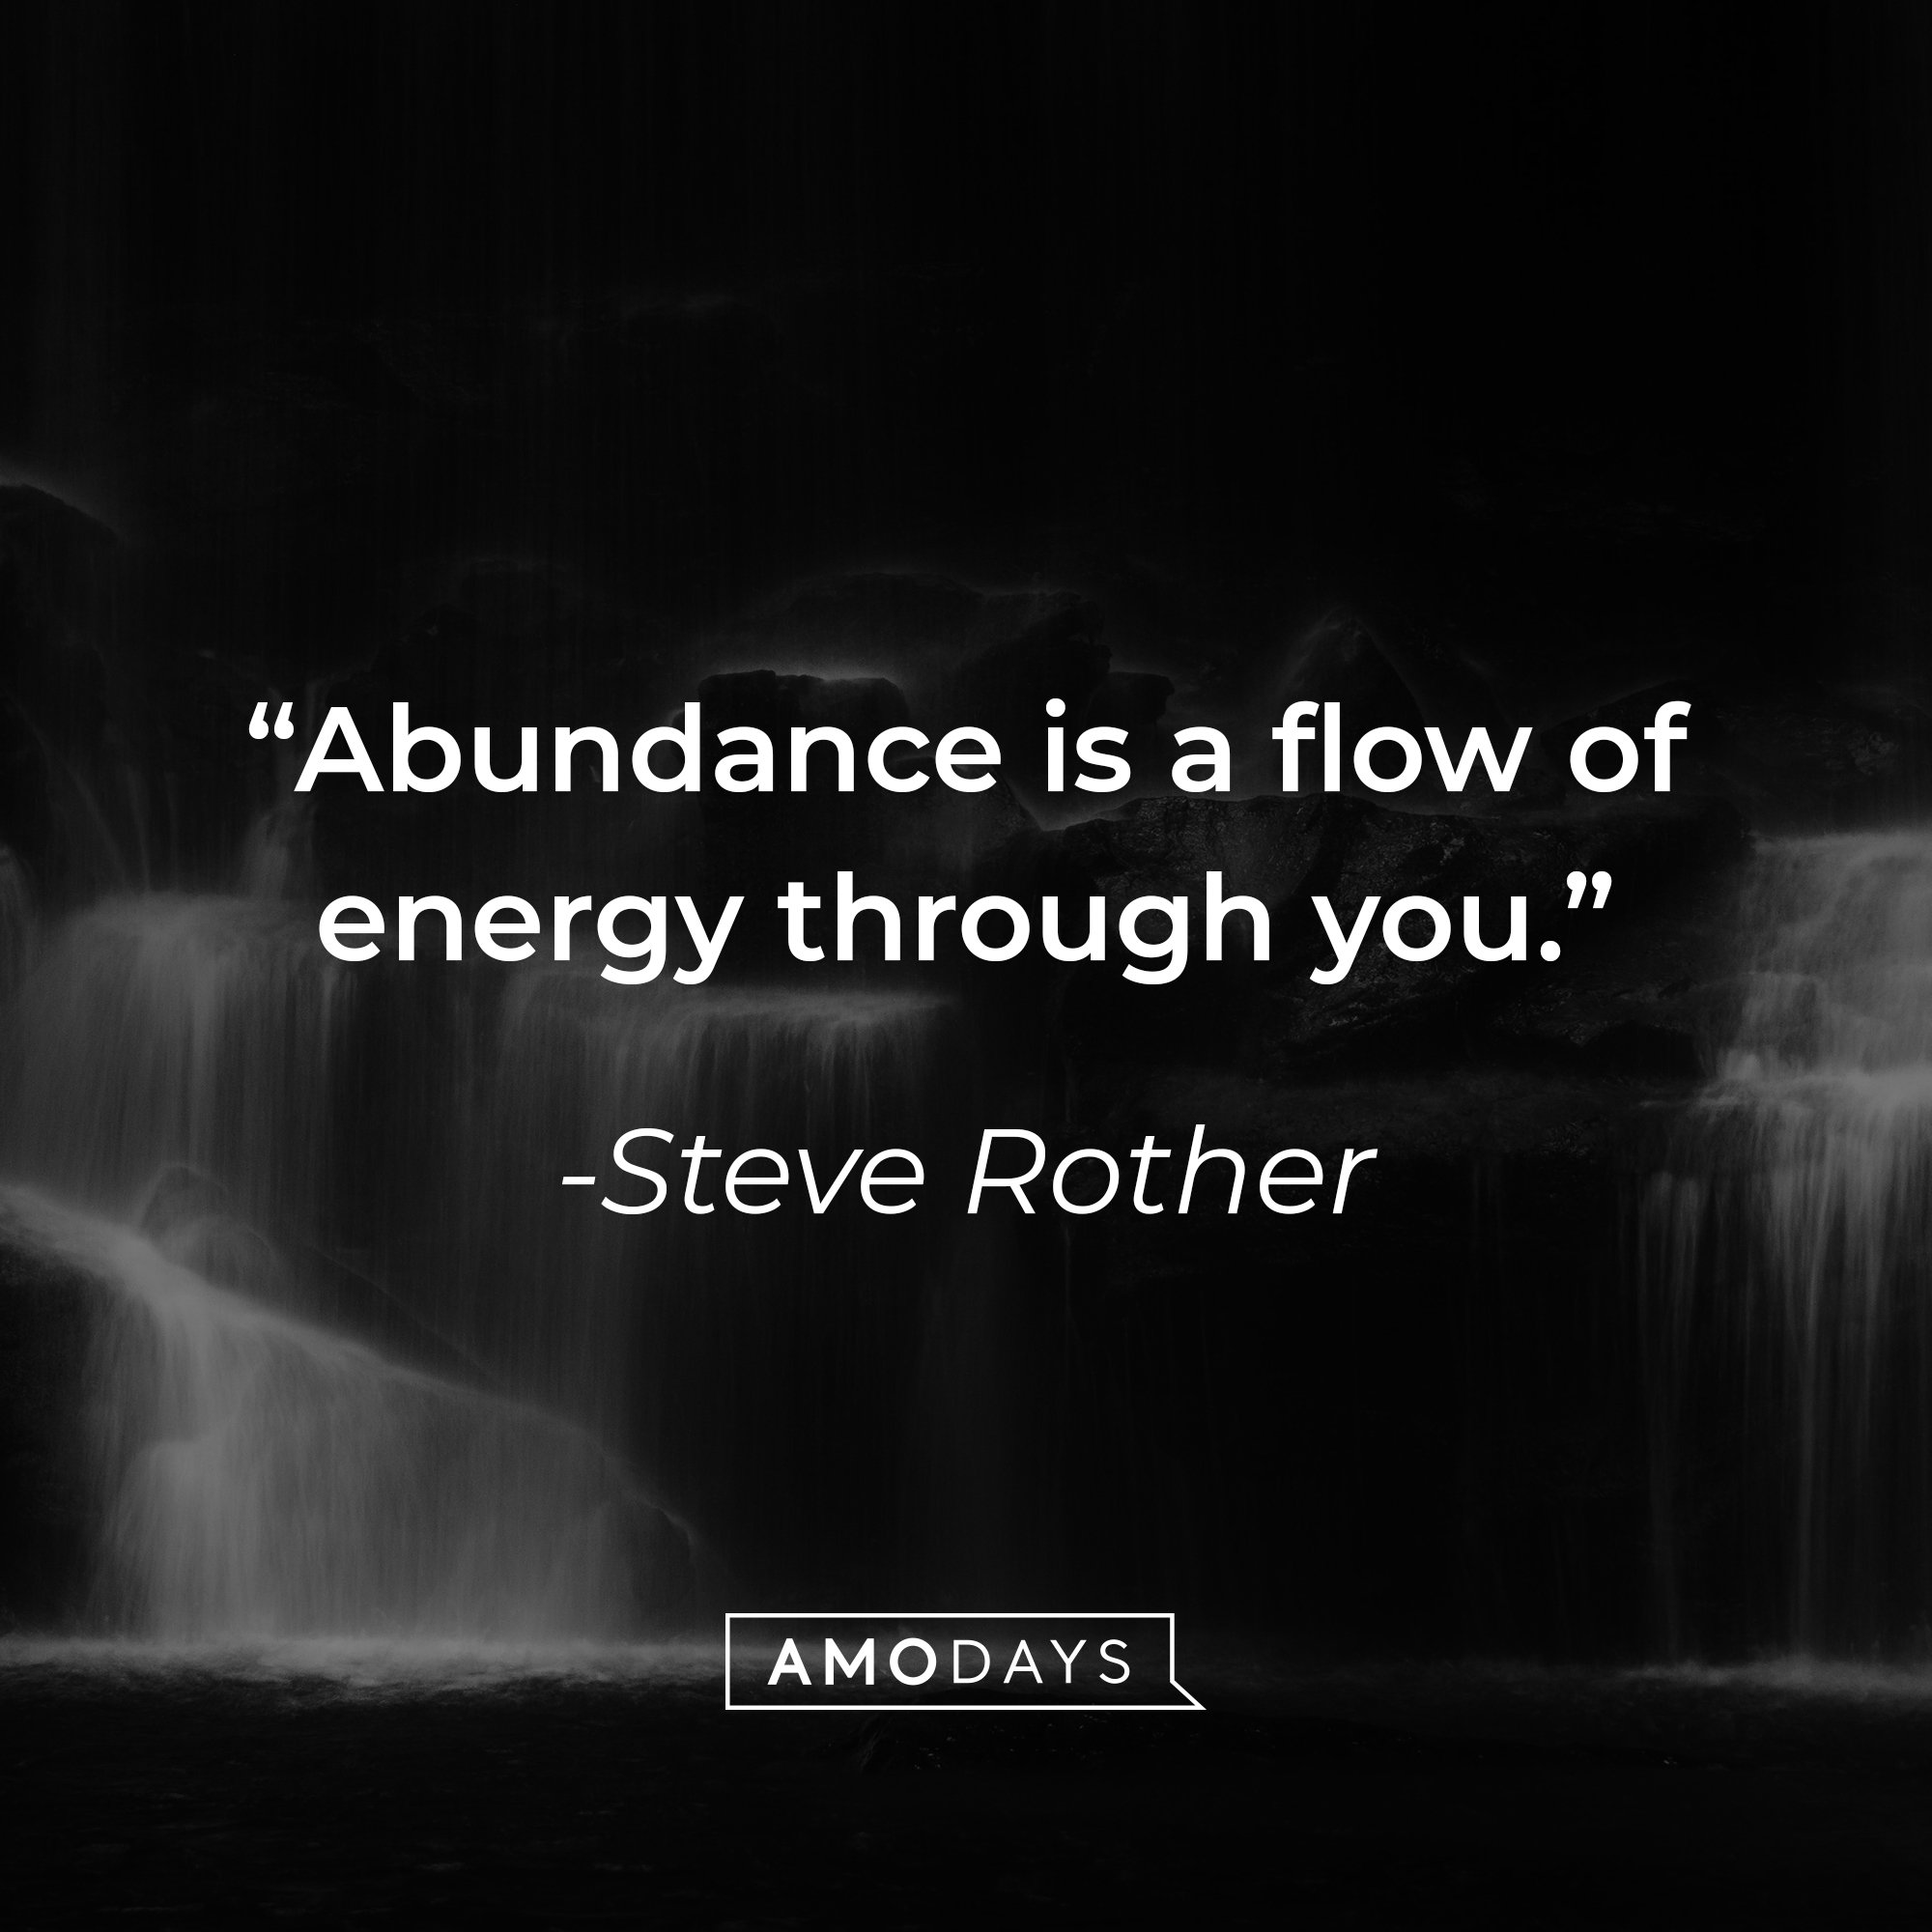 Steve Rother's quote: "Abundance is a flow of energy through you." | Image: AmoDays